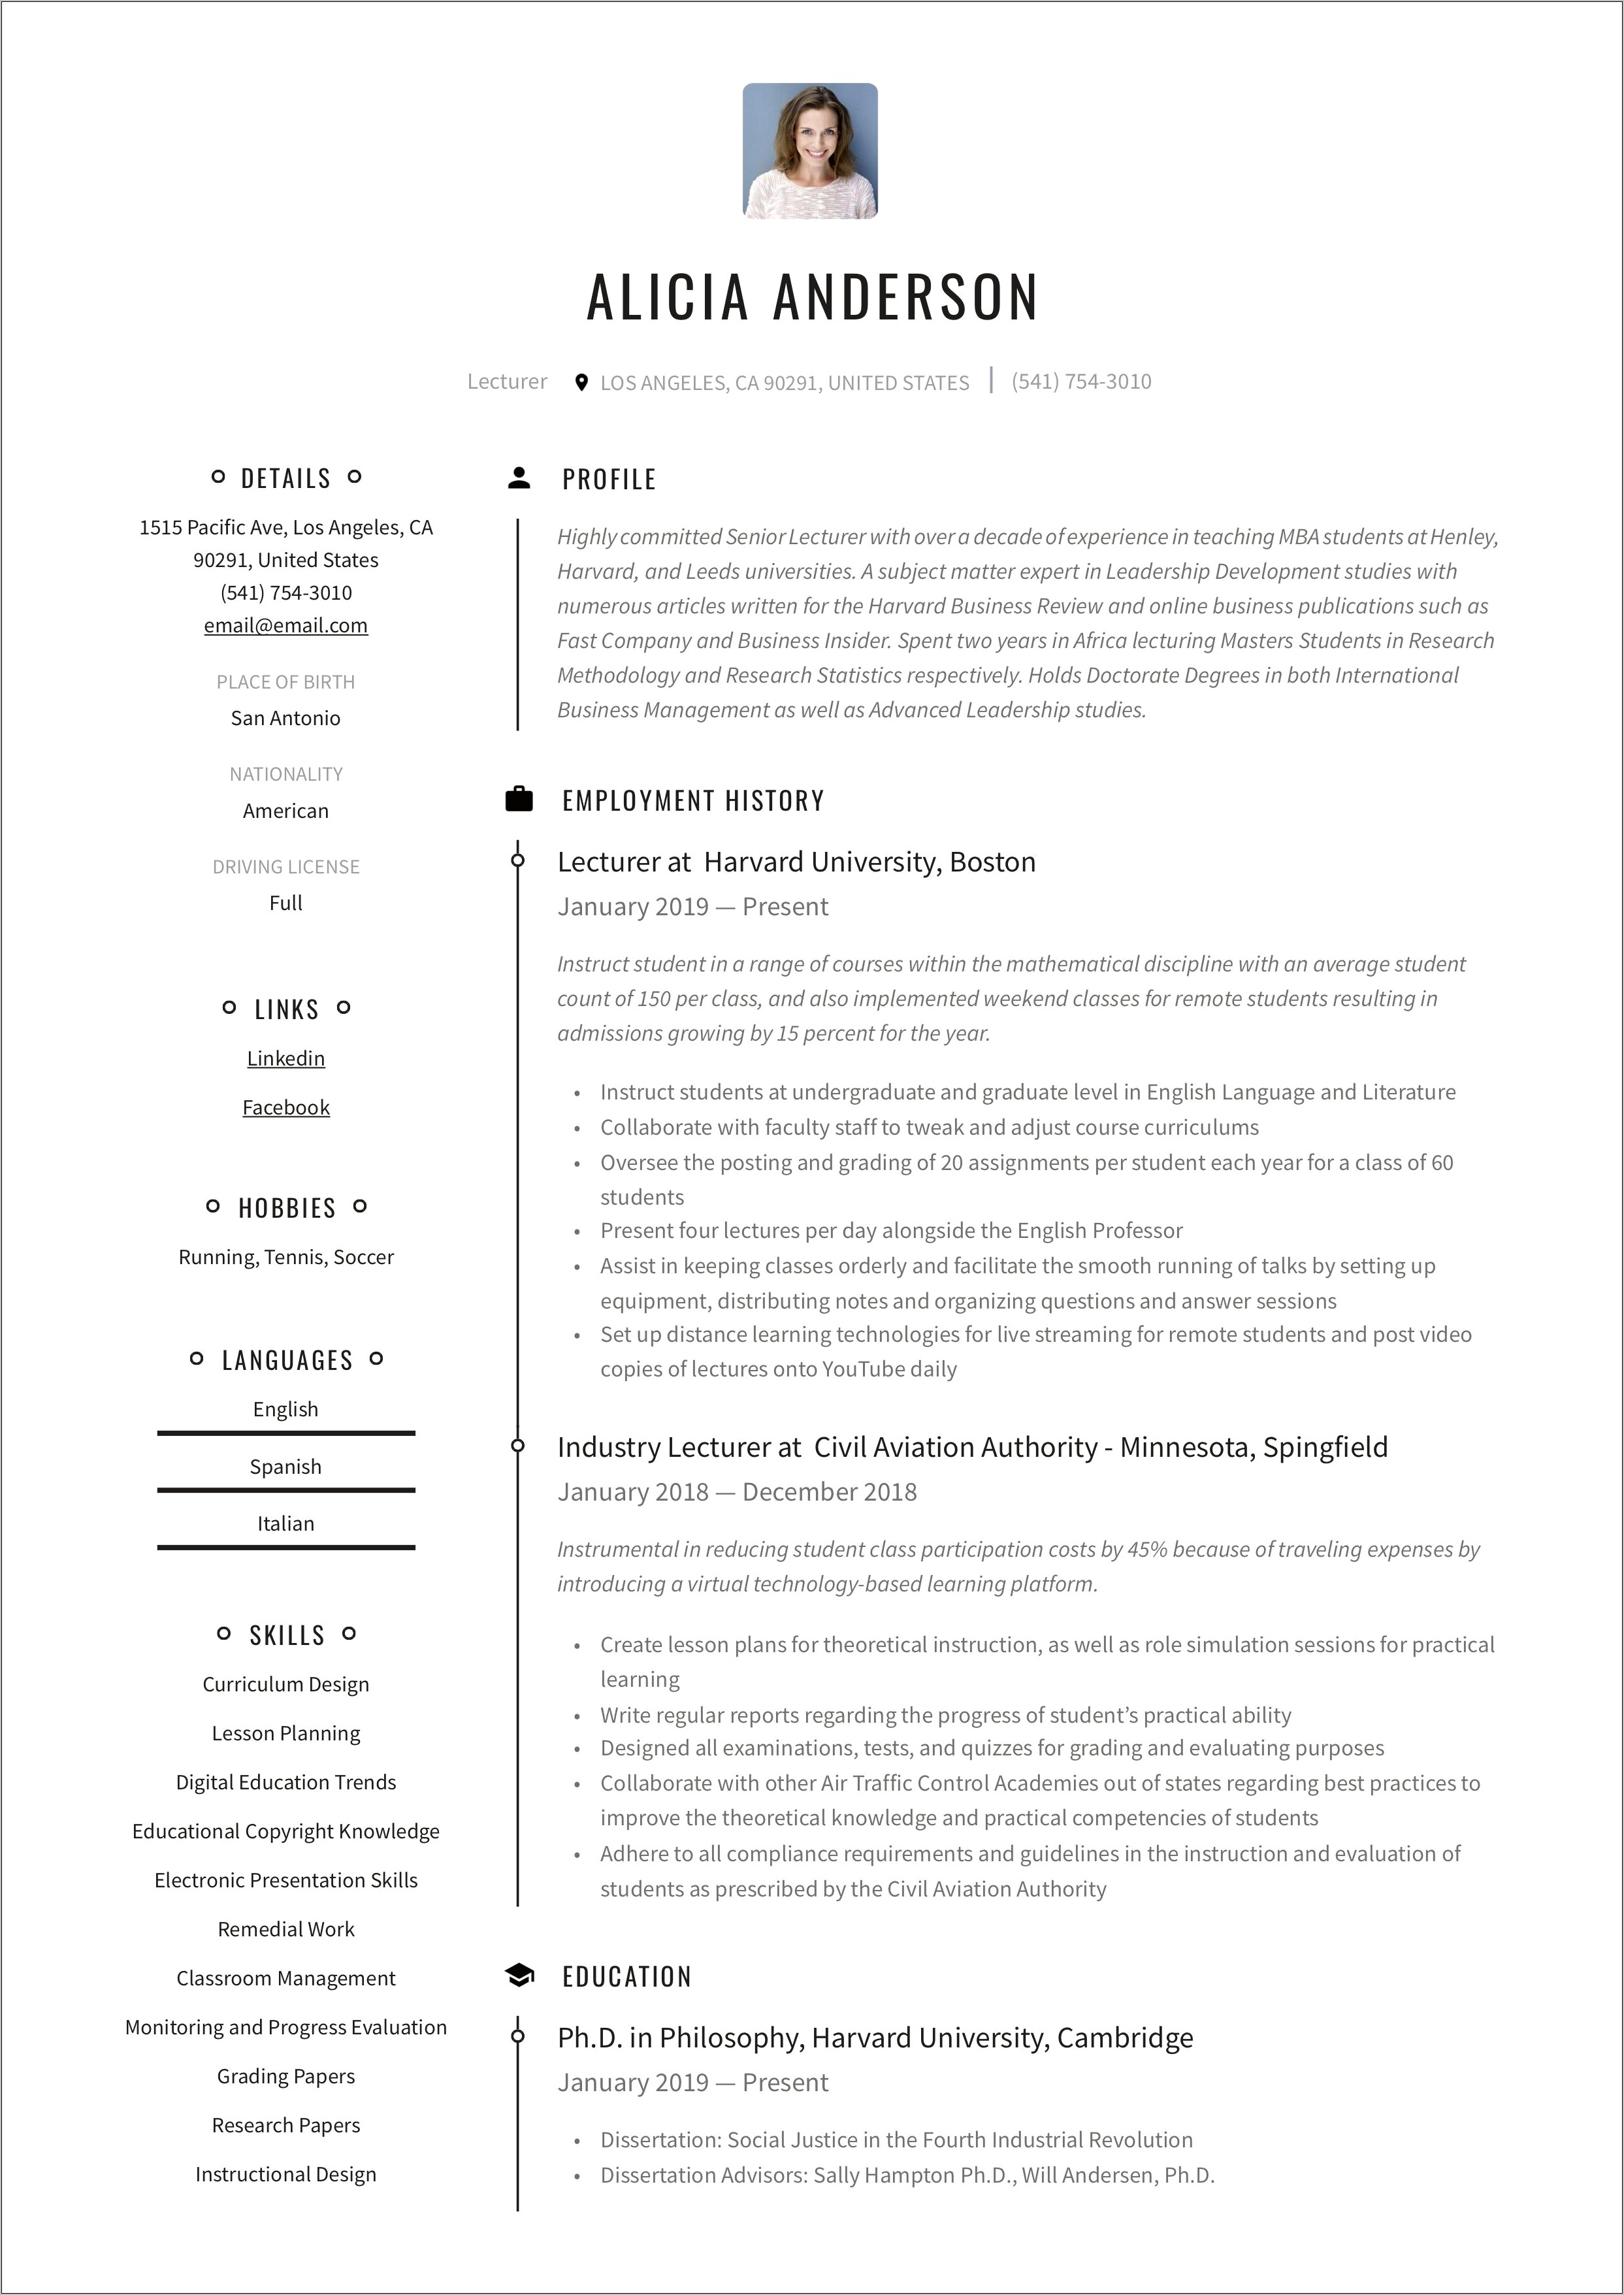 Resume Format For Conference Content Management Job